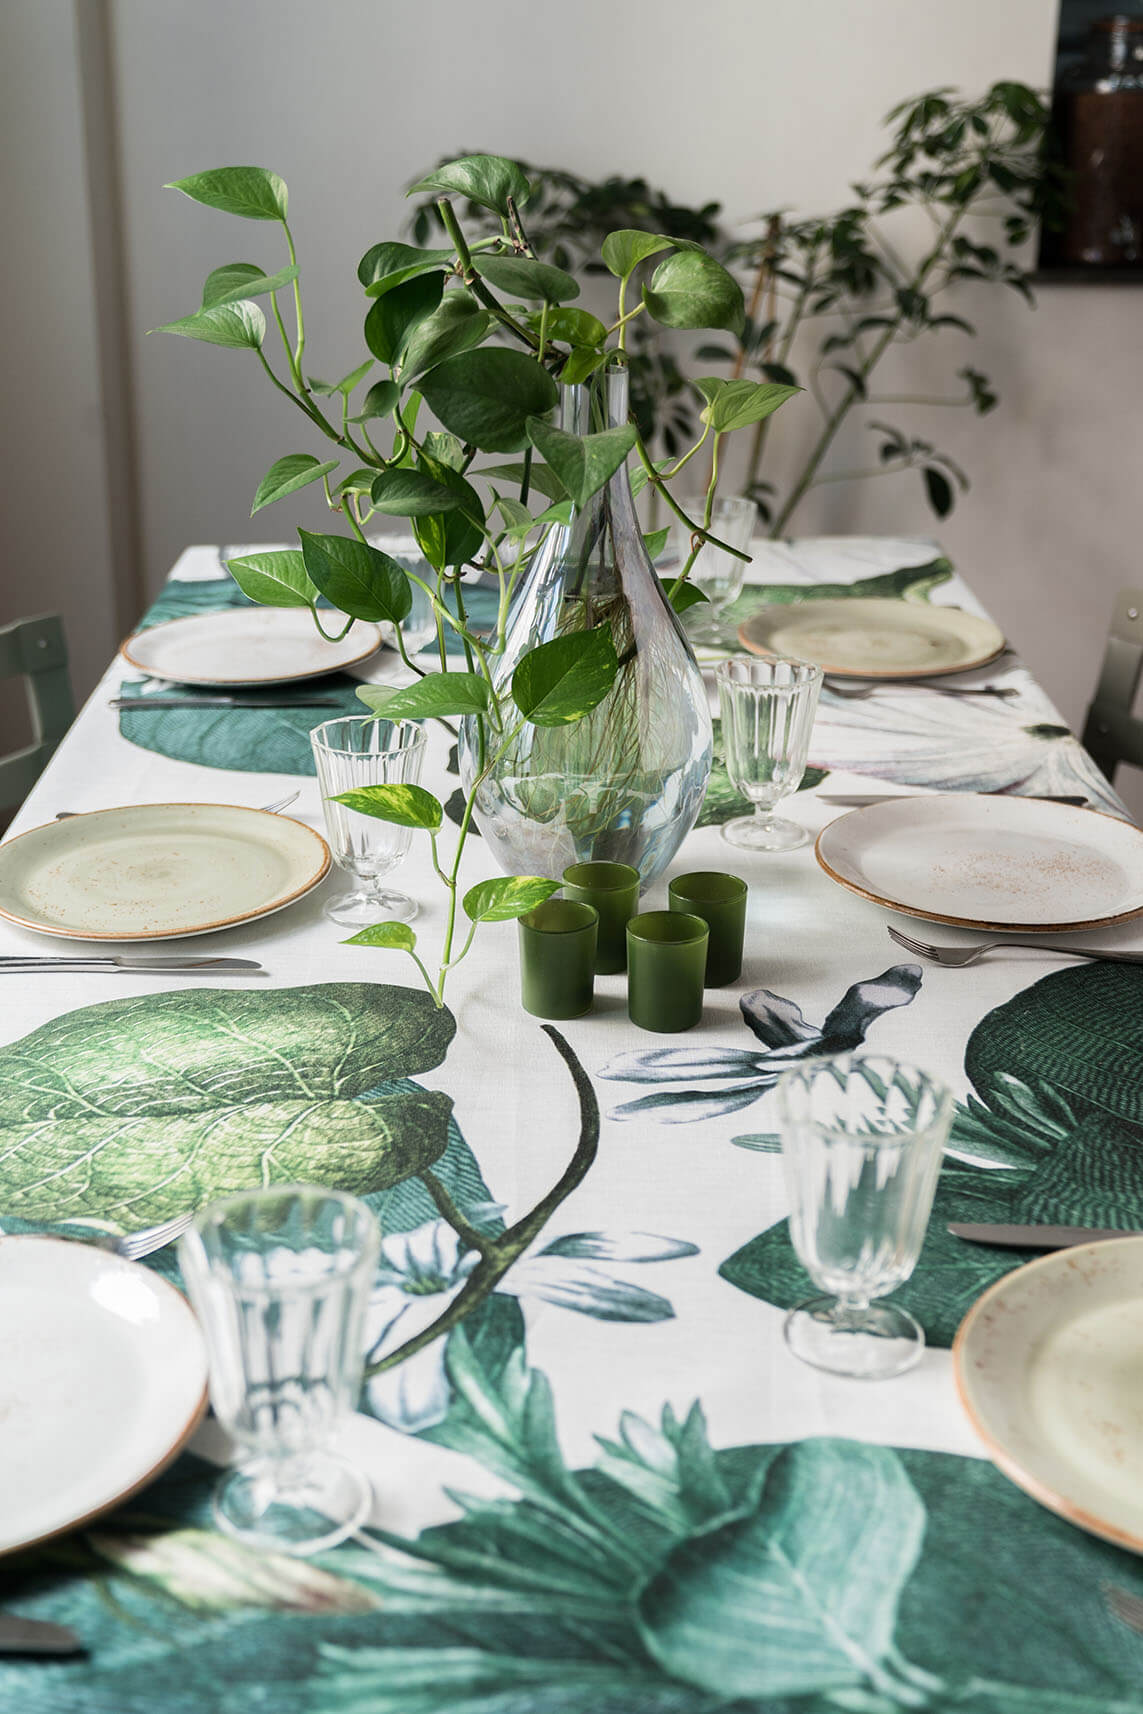 Tablecloth | Napkins with Green Floral Motifs